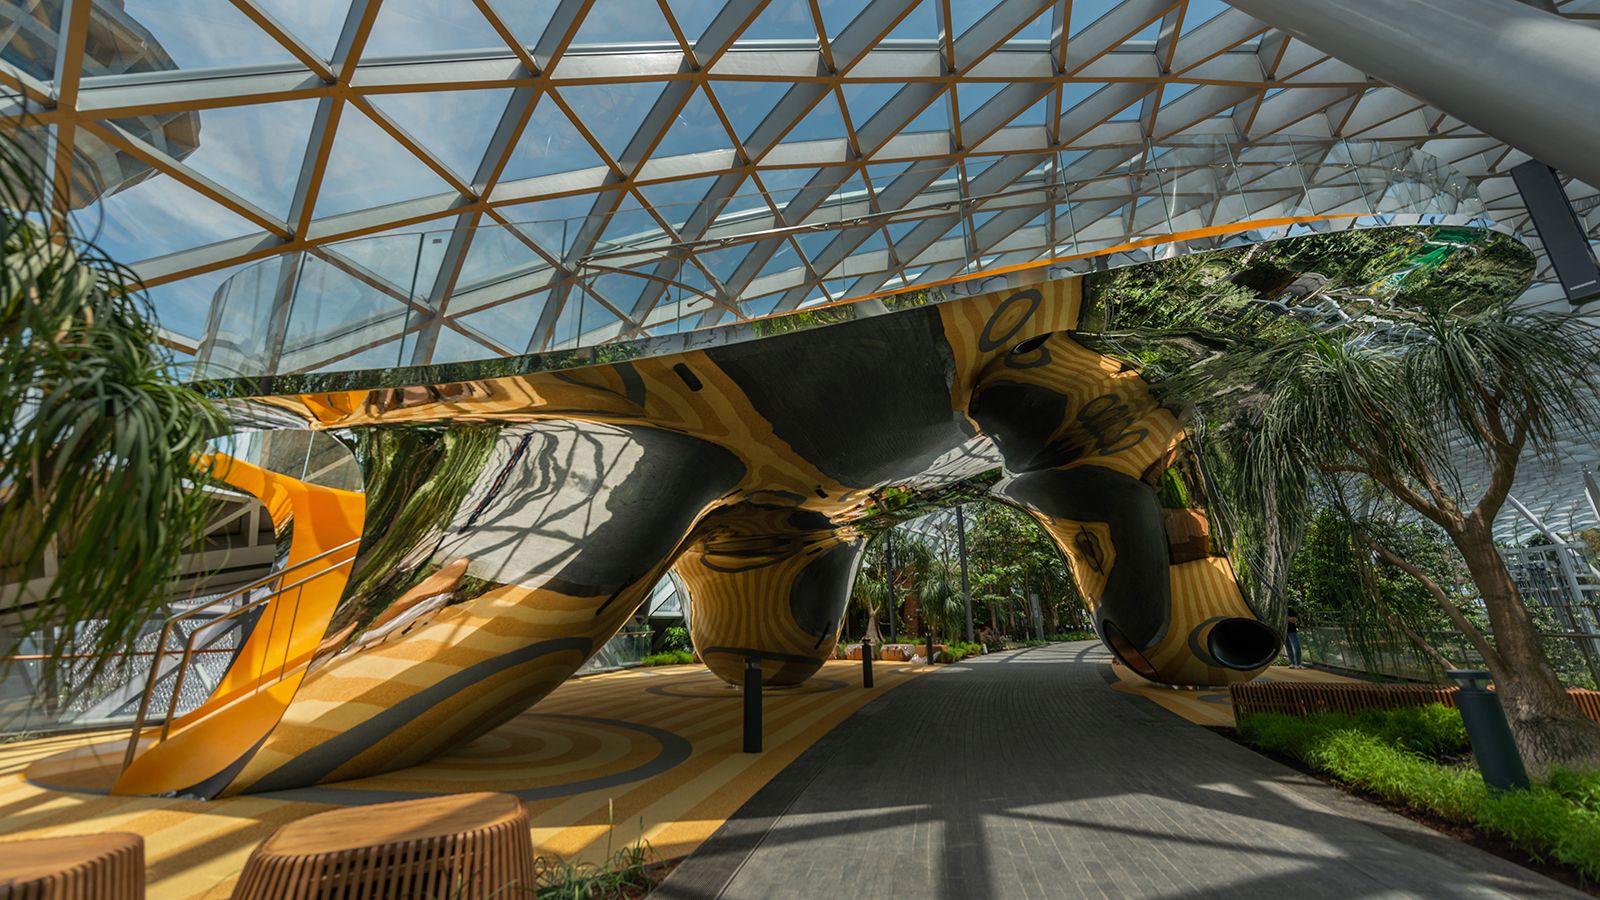 Singapore's Changi Airport Features a Giant Slide That Takes You to Your  Gate